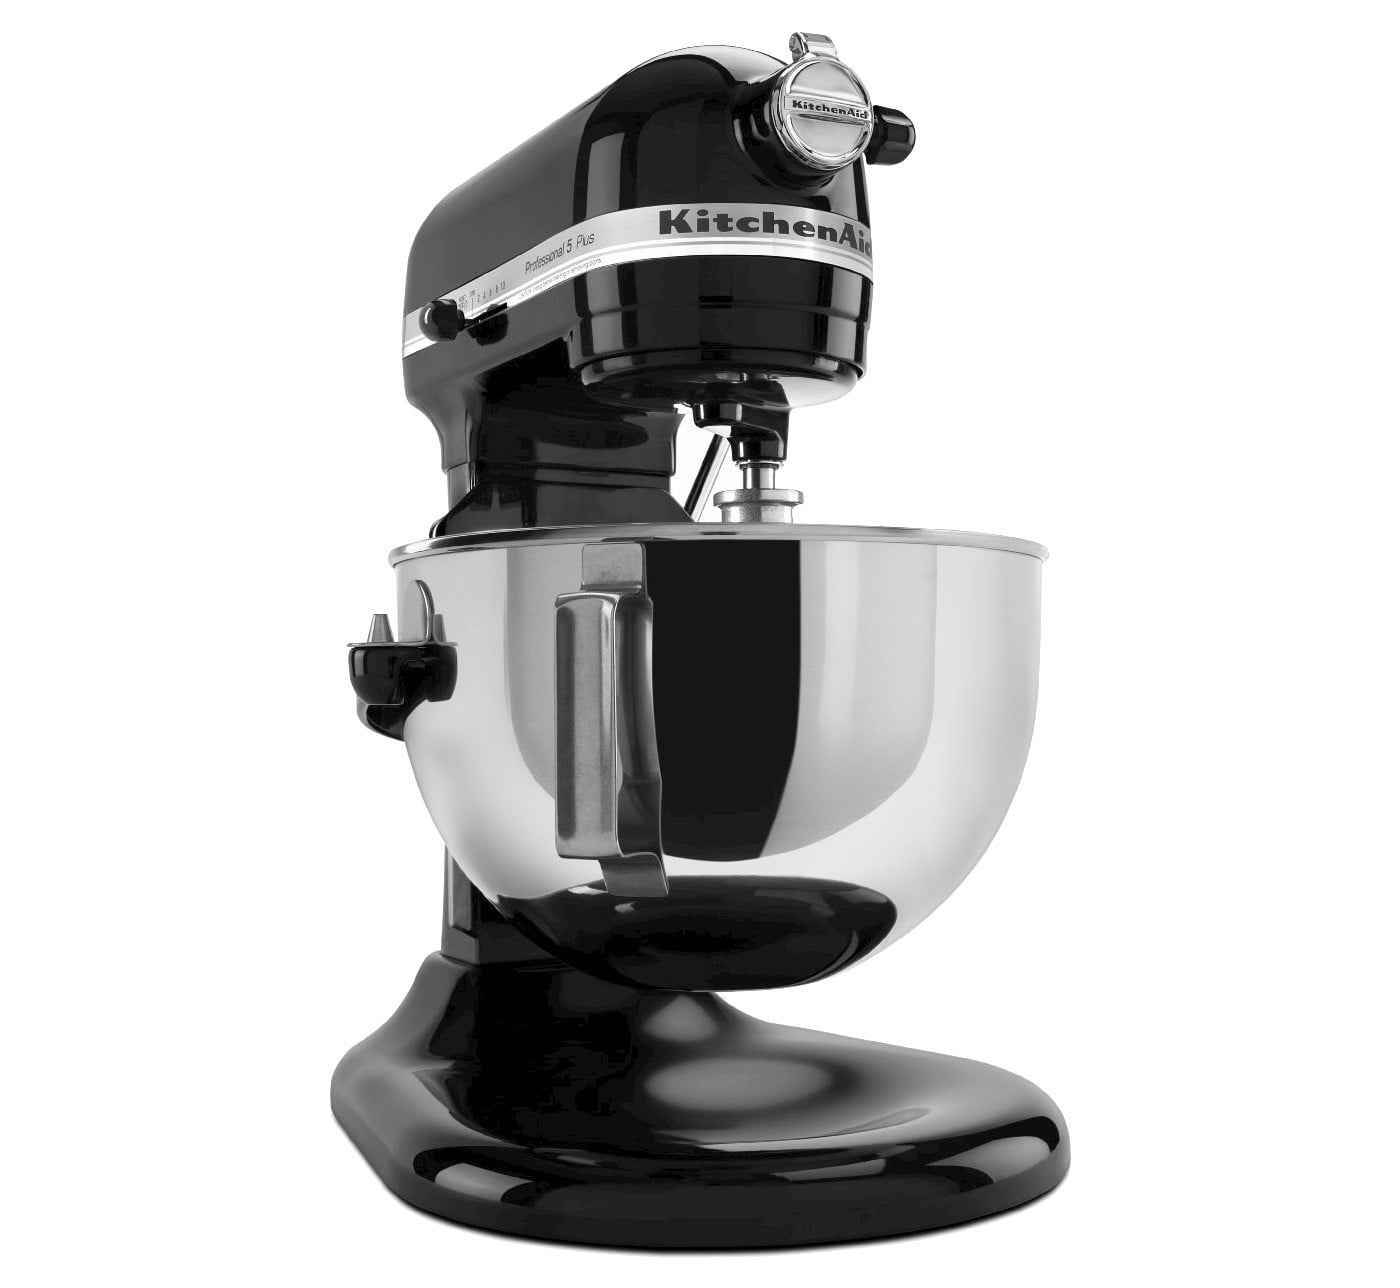 Target deals: KitchenAid stand mixers are on sale for $130 off 